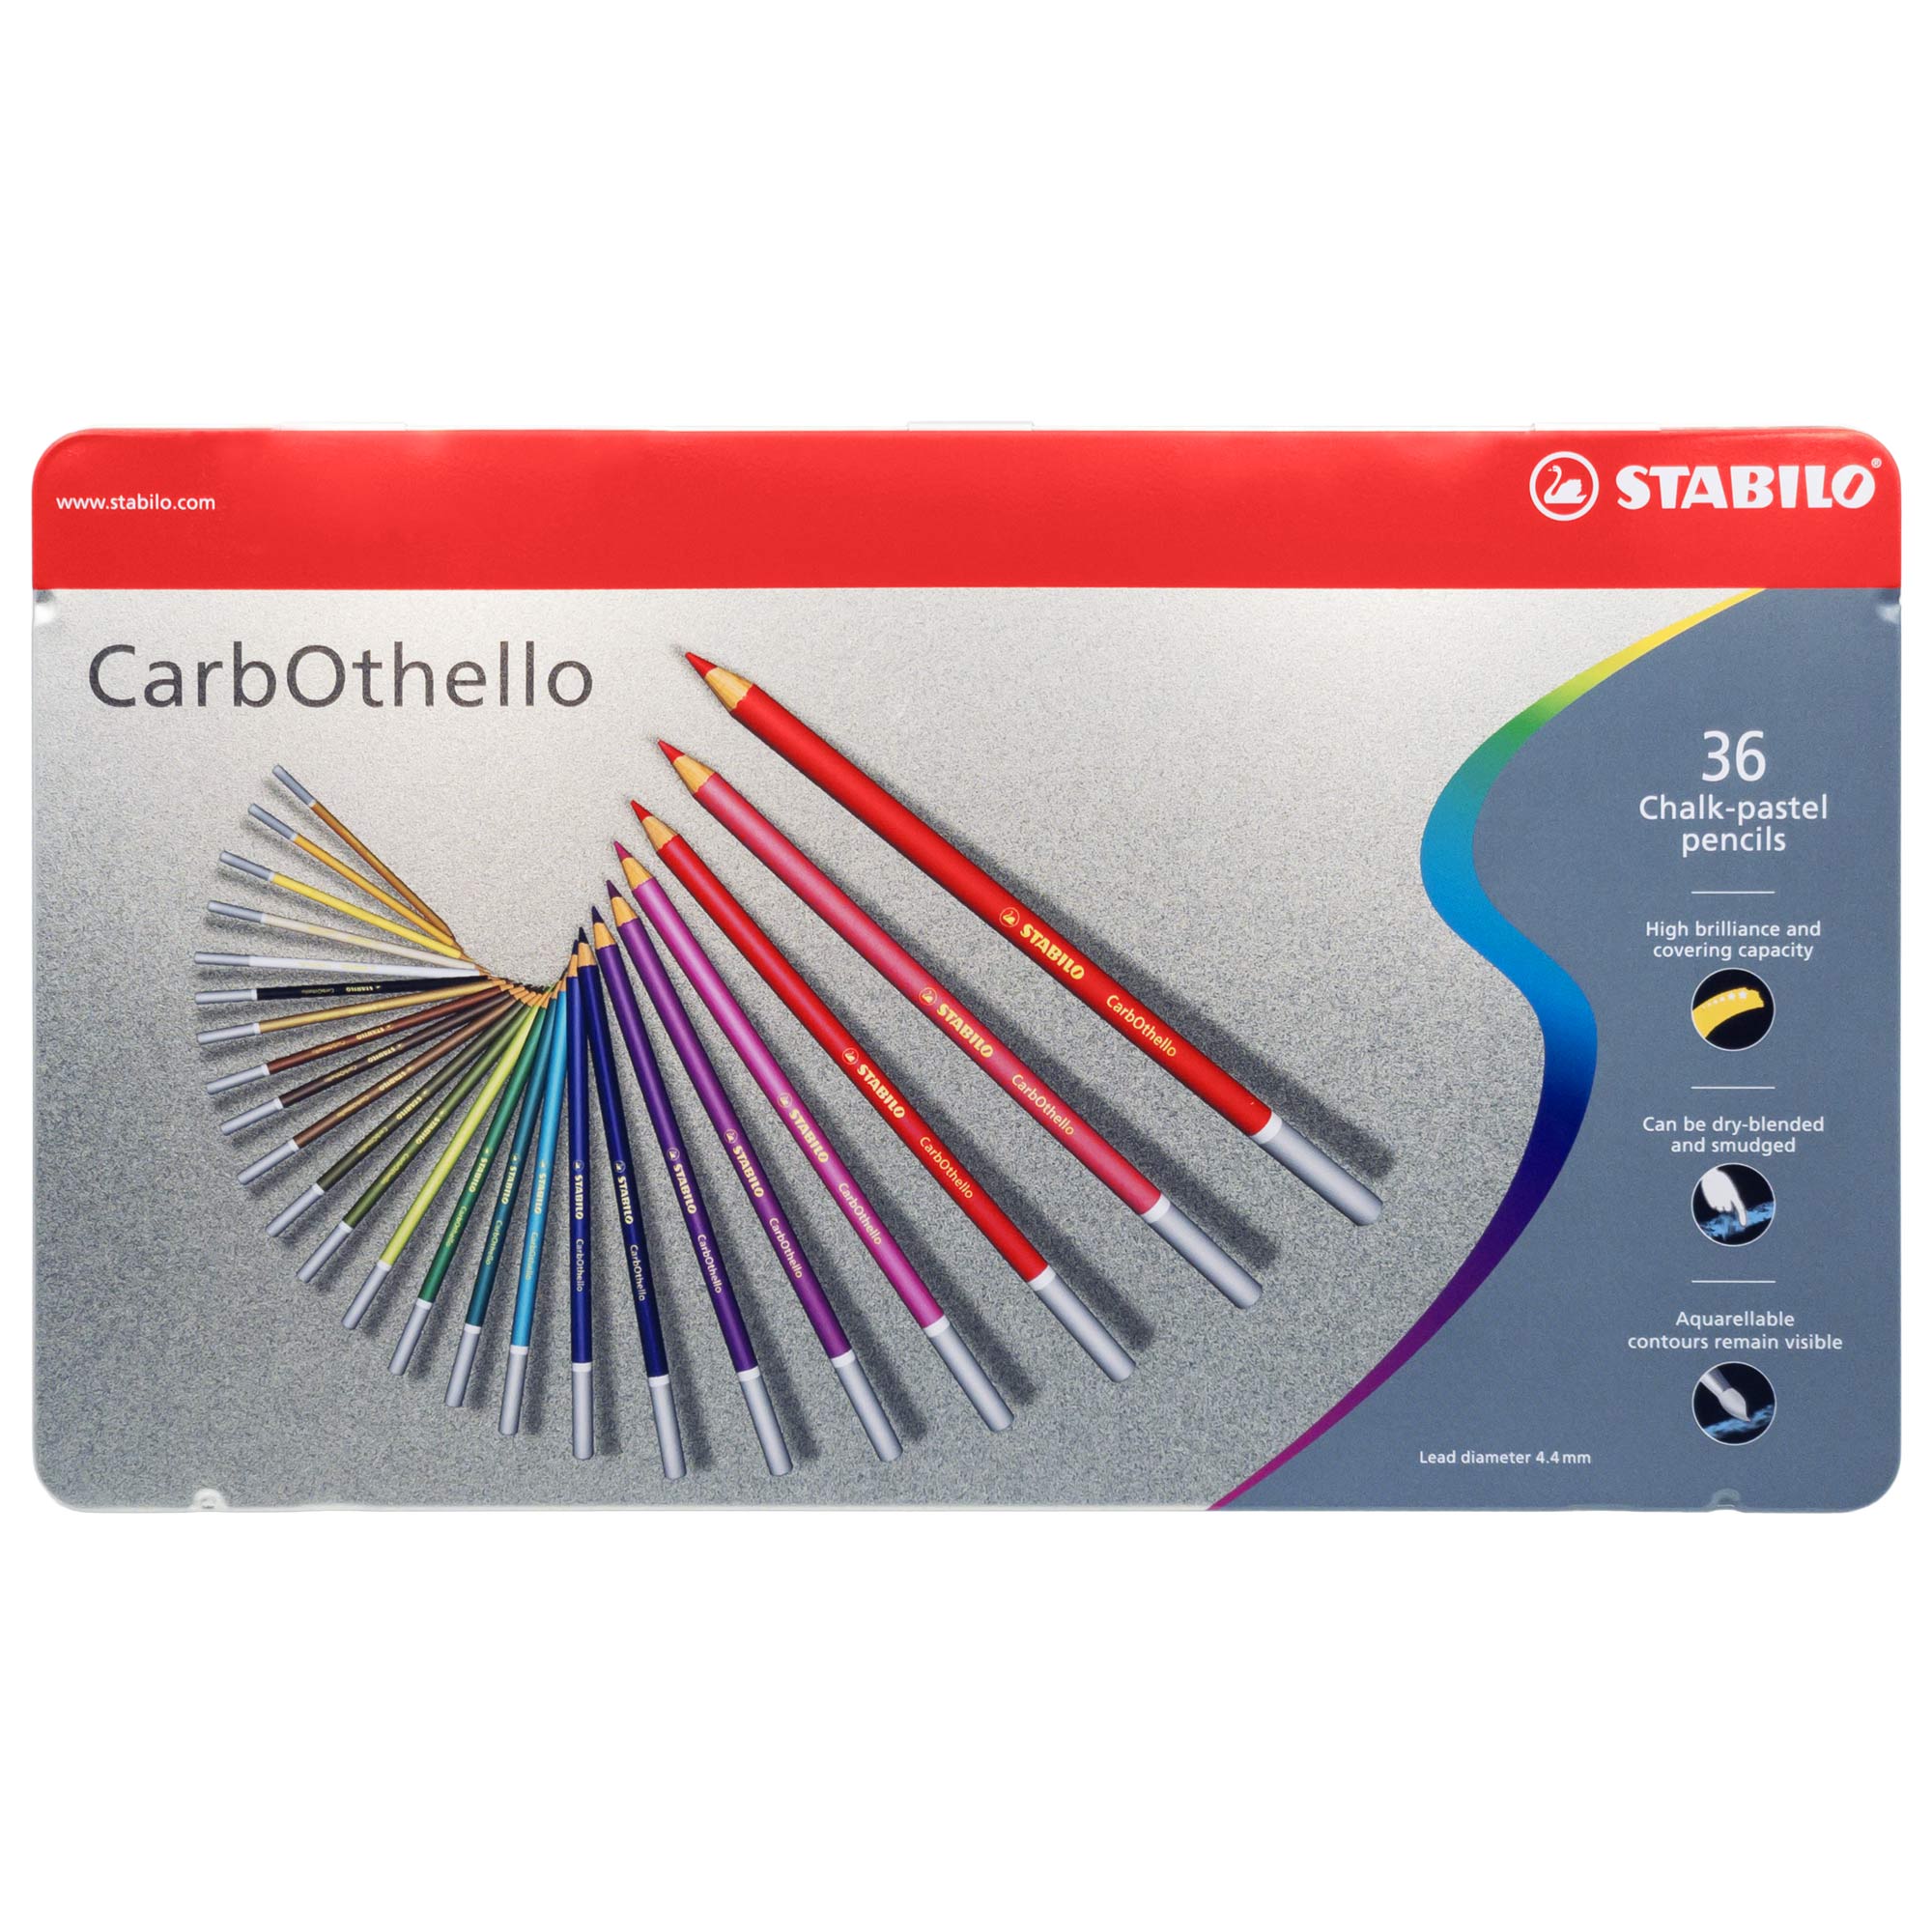 Stabilo Carbothello Chalk Pastel Pencils - Assorted Colours - Set of 36 - Tin